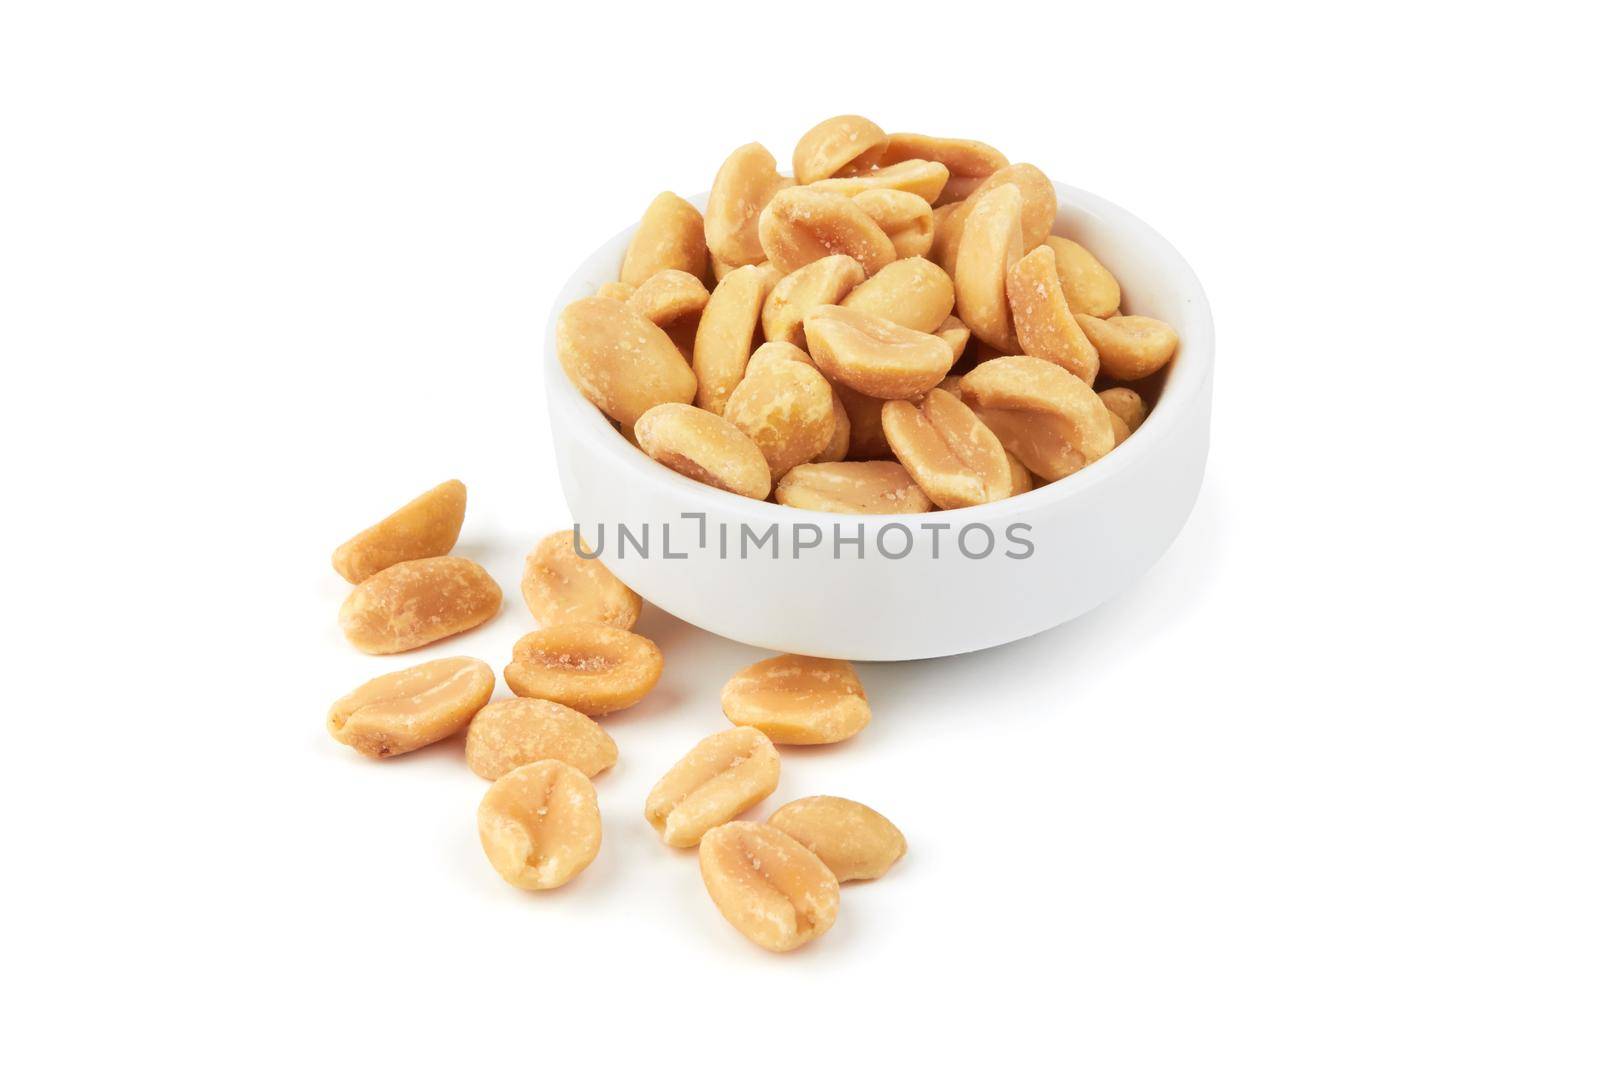 Peanuts in a bowl  by pioneer111